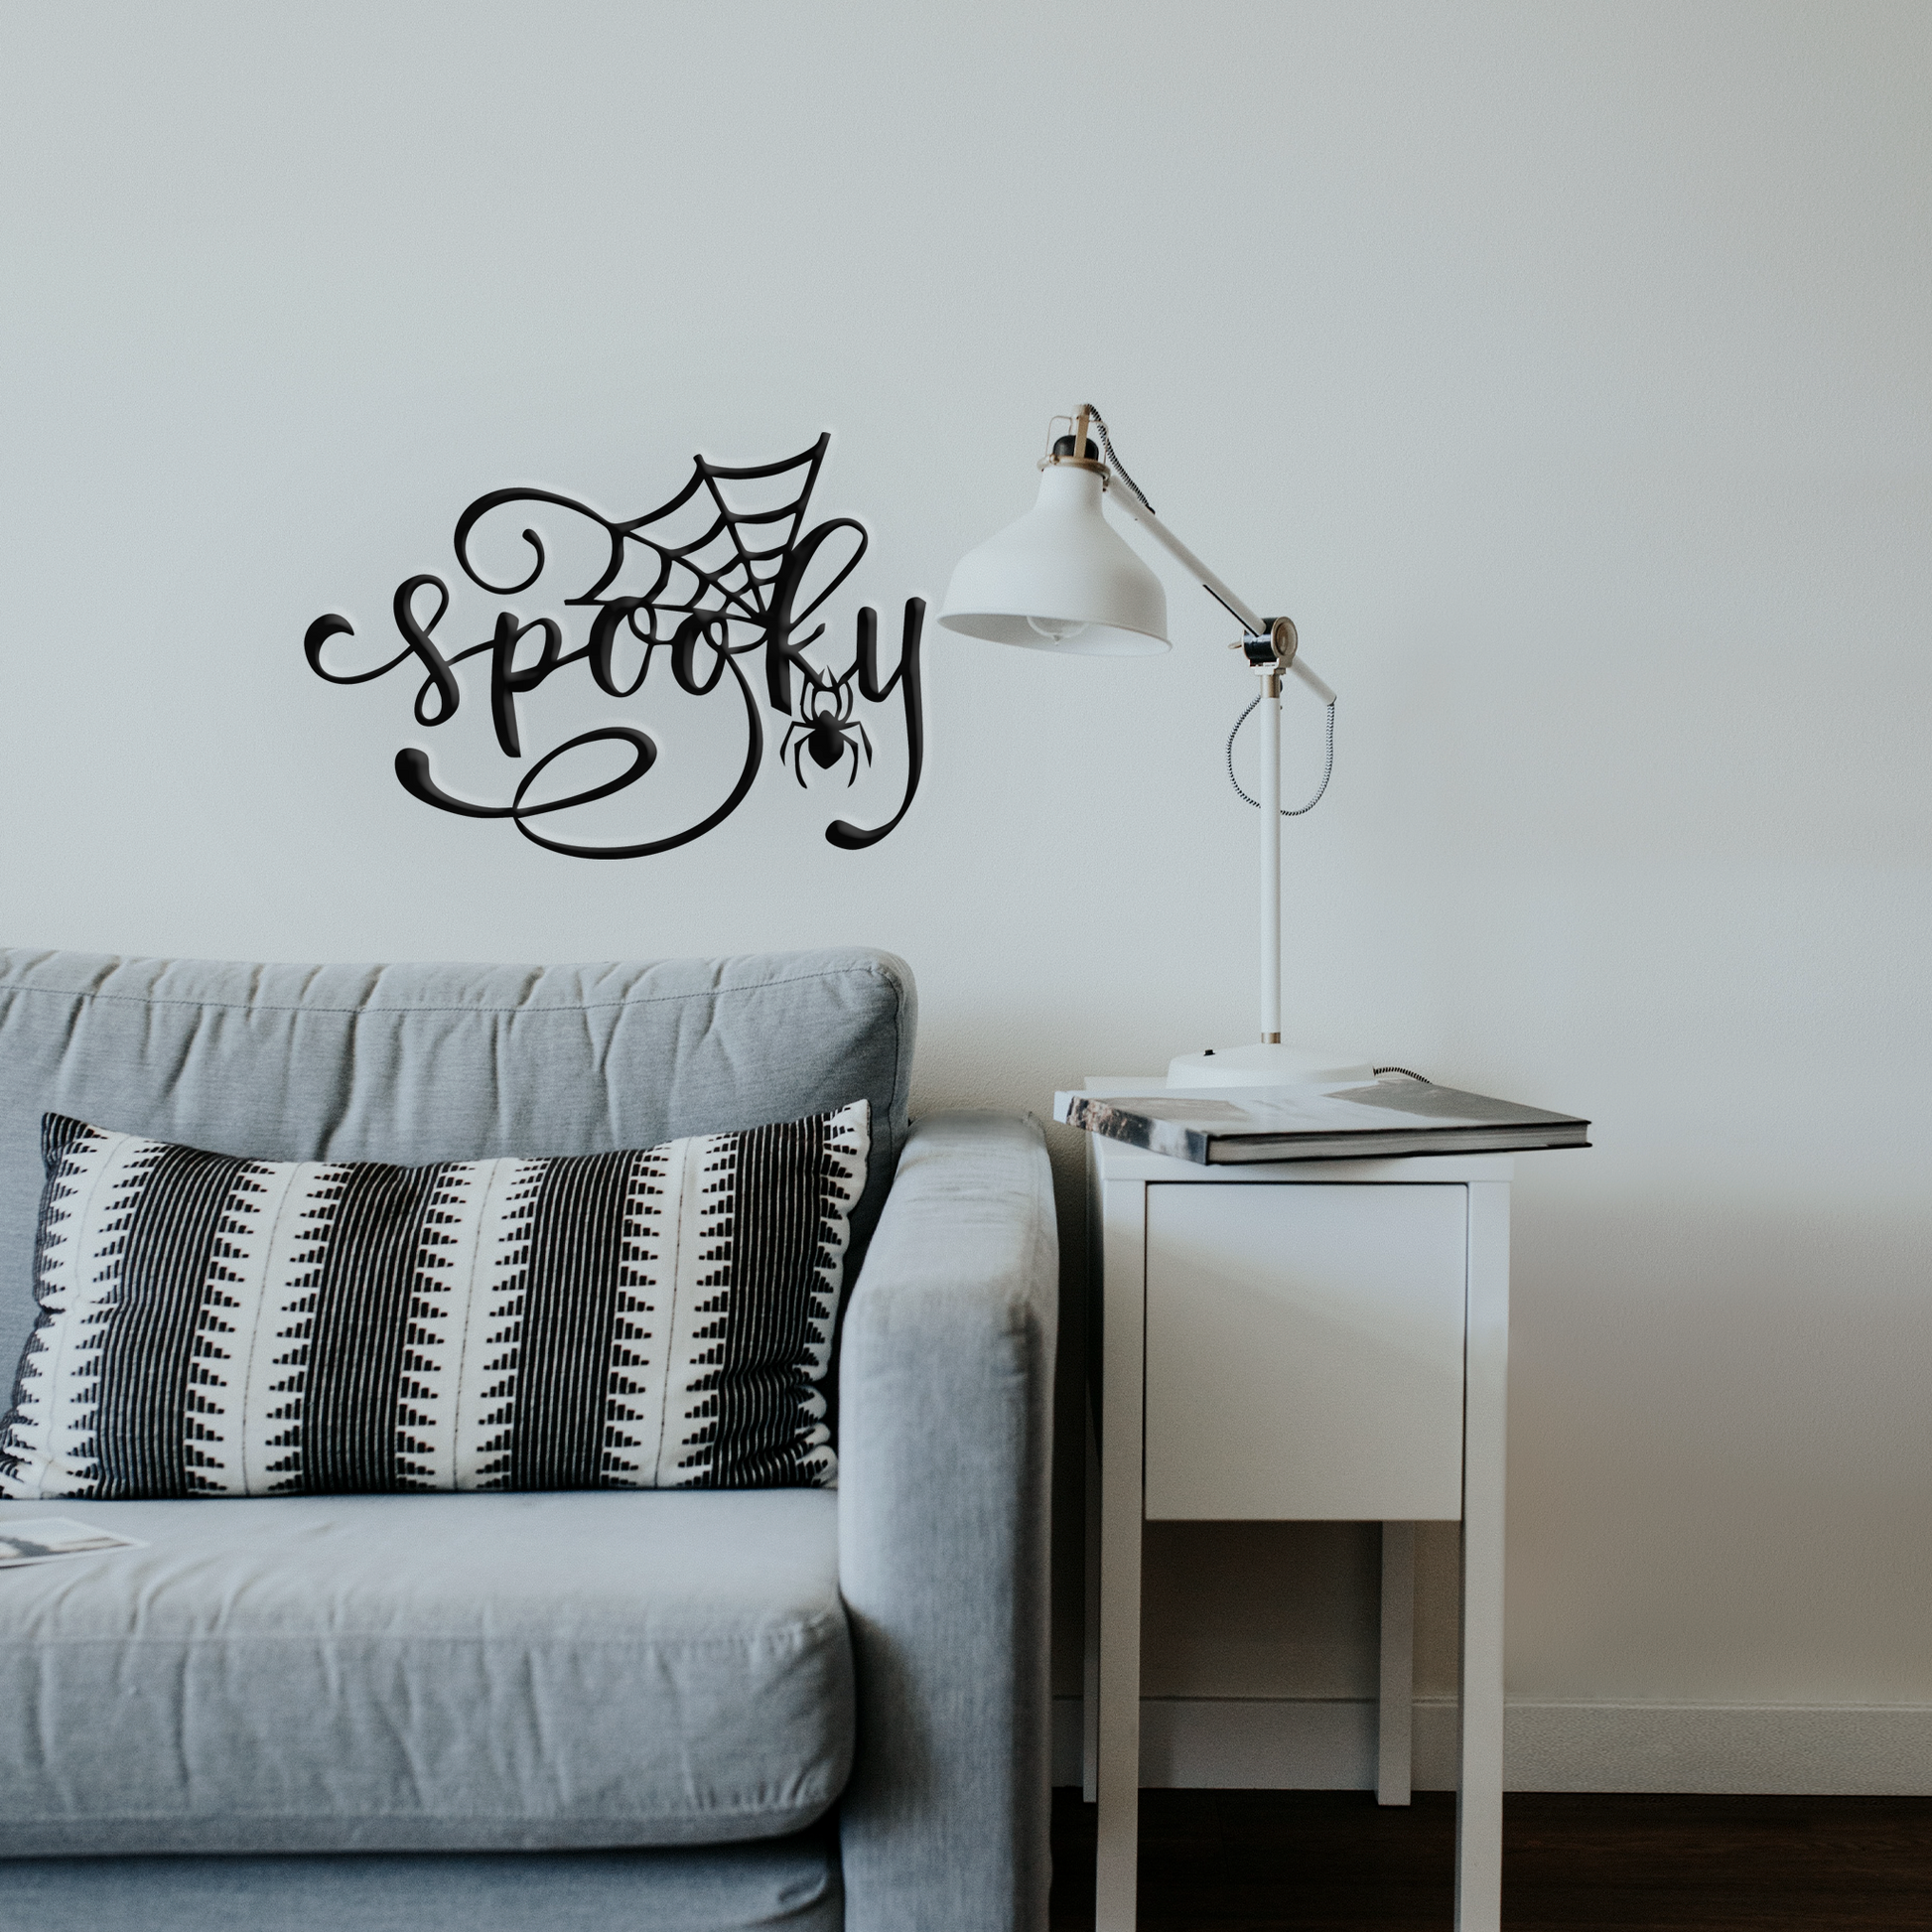 Spooky Web - Metal Wall Art With Couch - Badger Steel USA